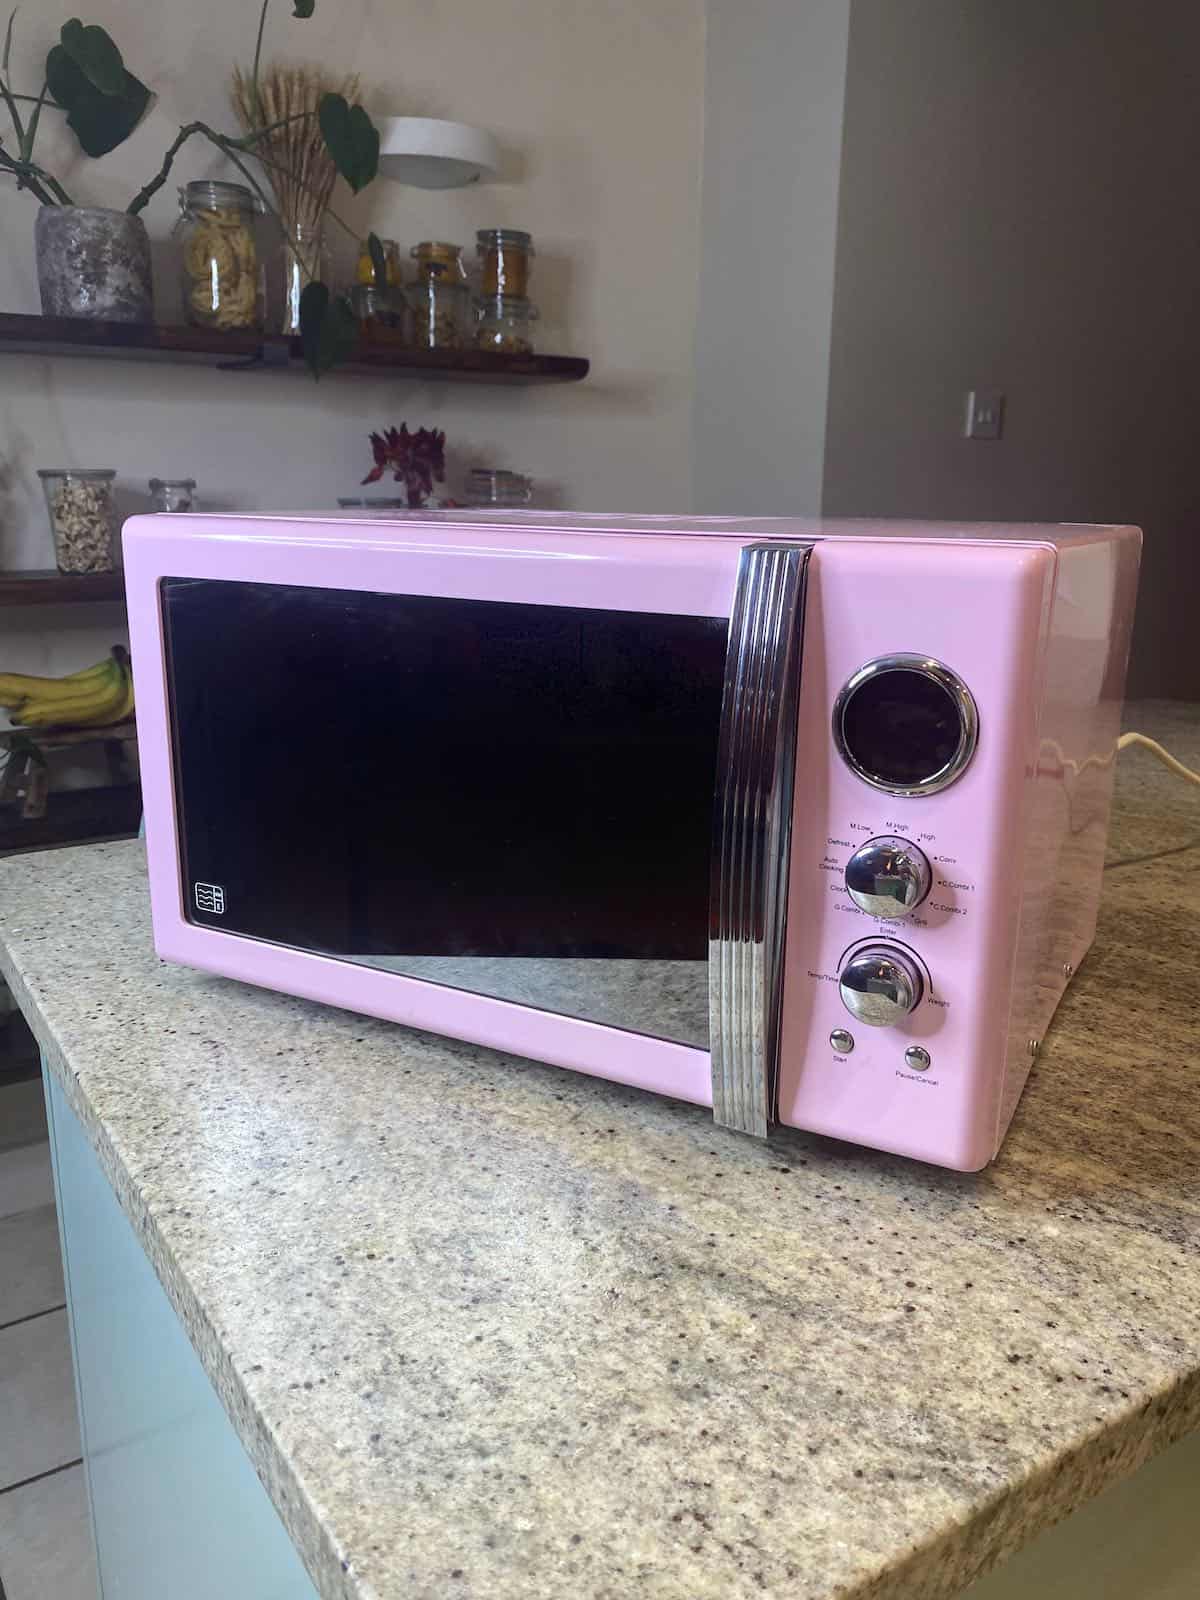 A clean pink microwave on a kitchen island